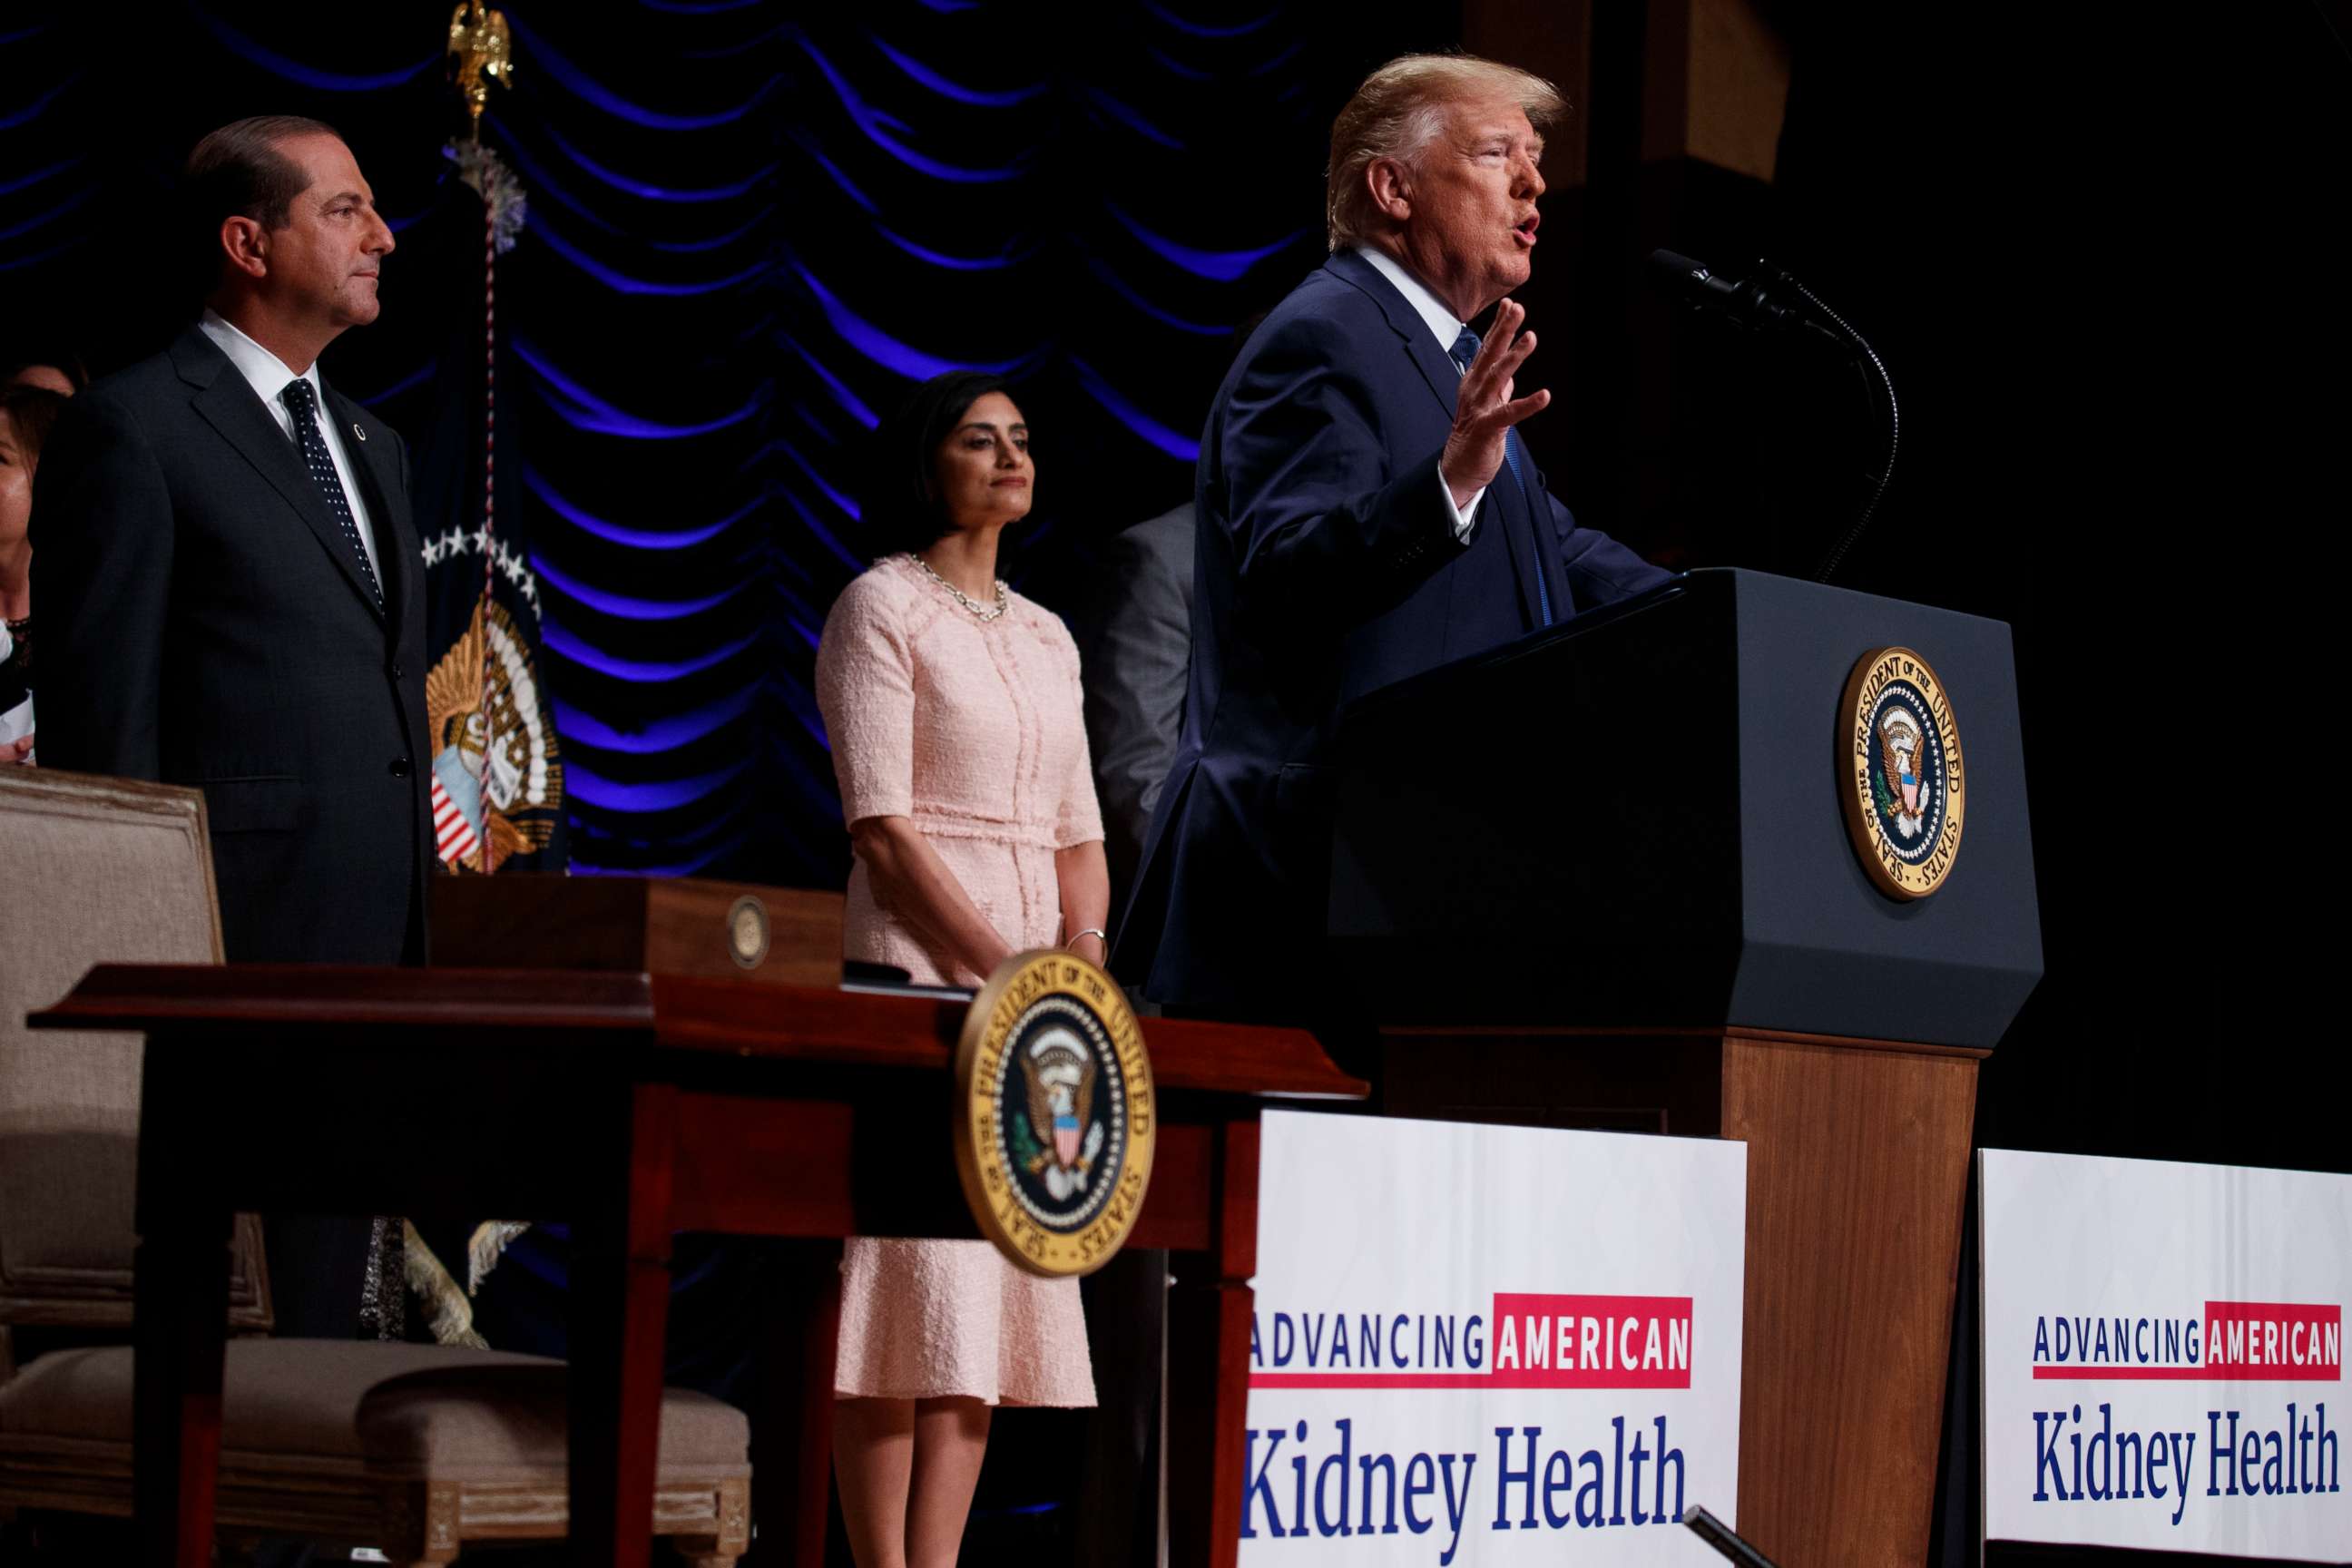 PHOTO: Secretary of Health and Human Services Alex Azar and administrator of the Centers for Medicare and Medicaid Services Seema Verma look on as President Donald Trump speaks in Washington, July 10, 2019.